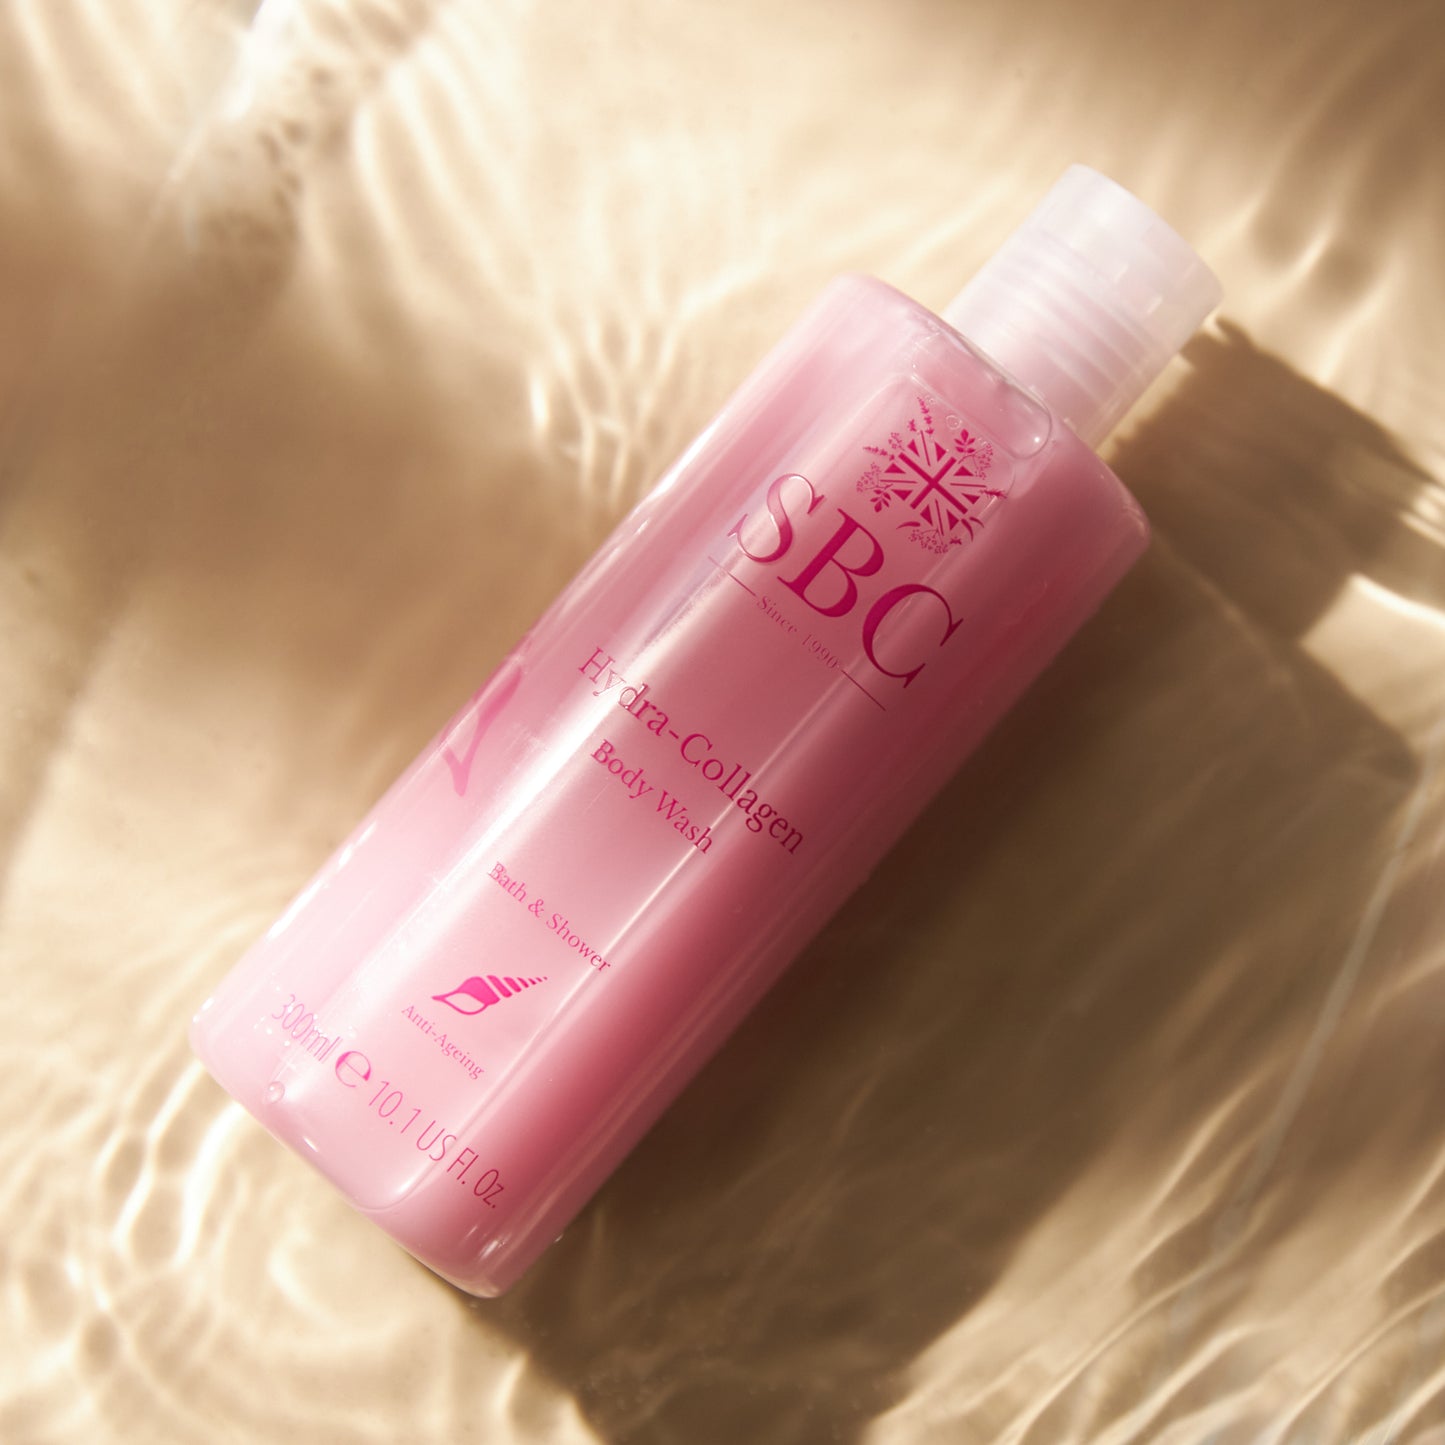  300ml of SBC Skincare's Hydra-Collagen Body Wash laying in a pool of water